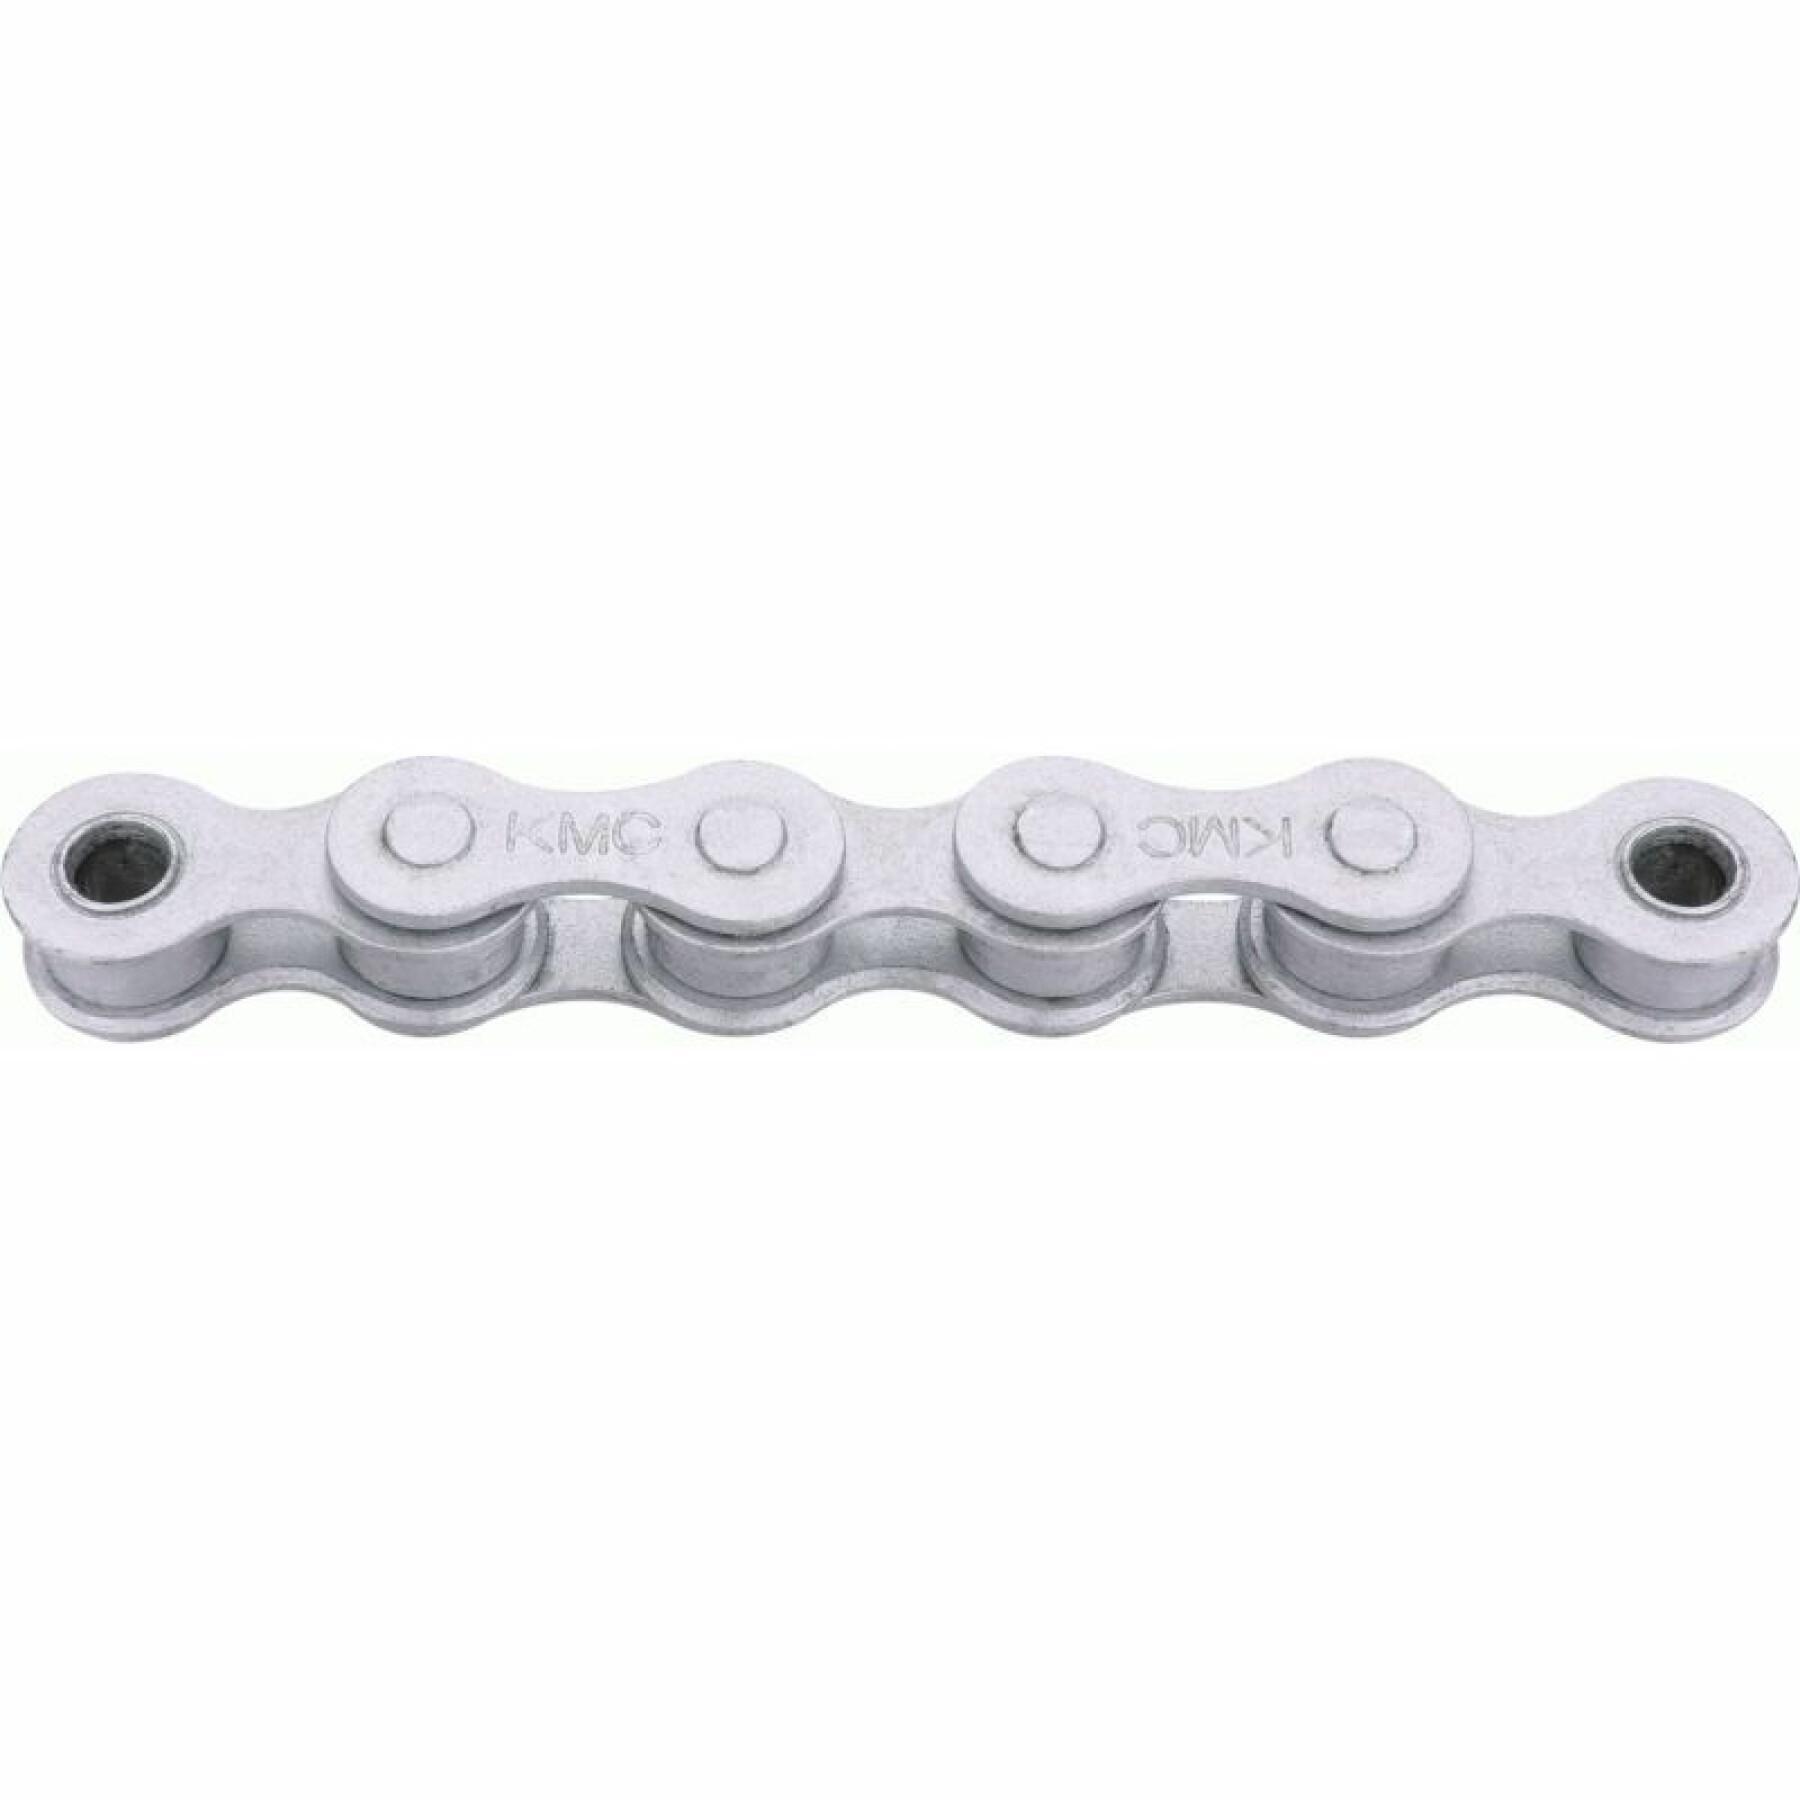 Wide stainless steel chain KMC b1 112L 1vrb